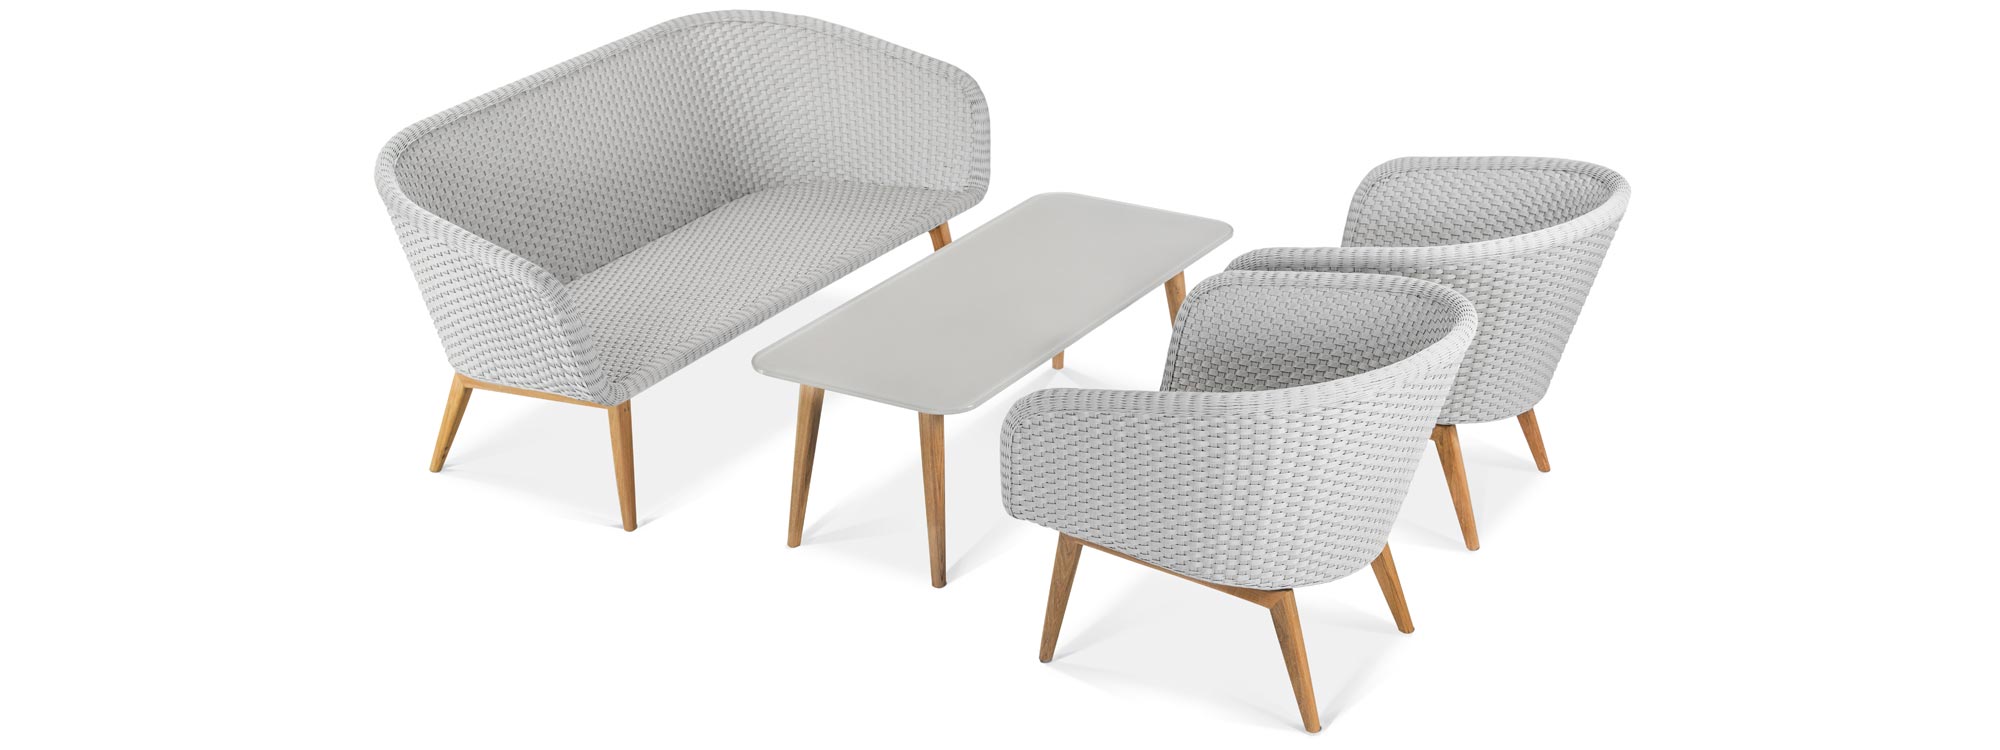 Shell exterior lounge set features retro design by Jan des Bouvrie for FueraDentro, Netherlands.